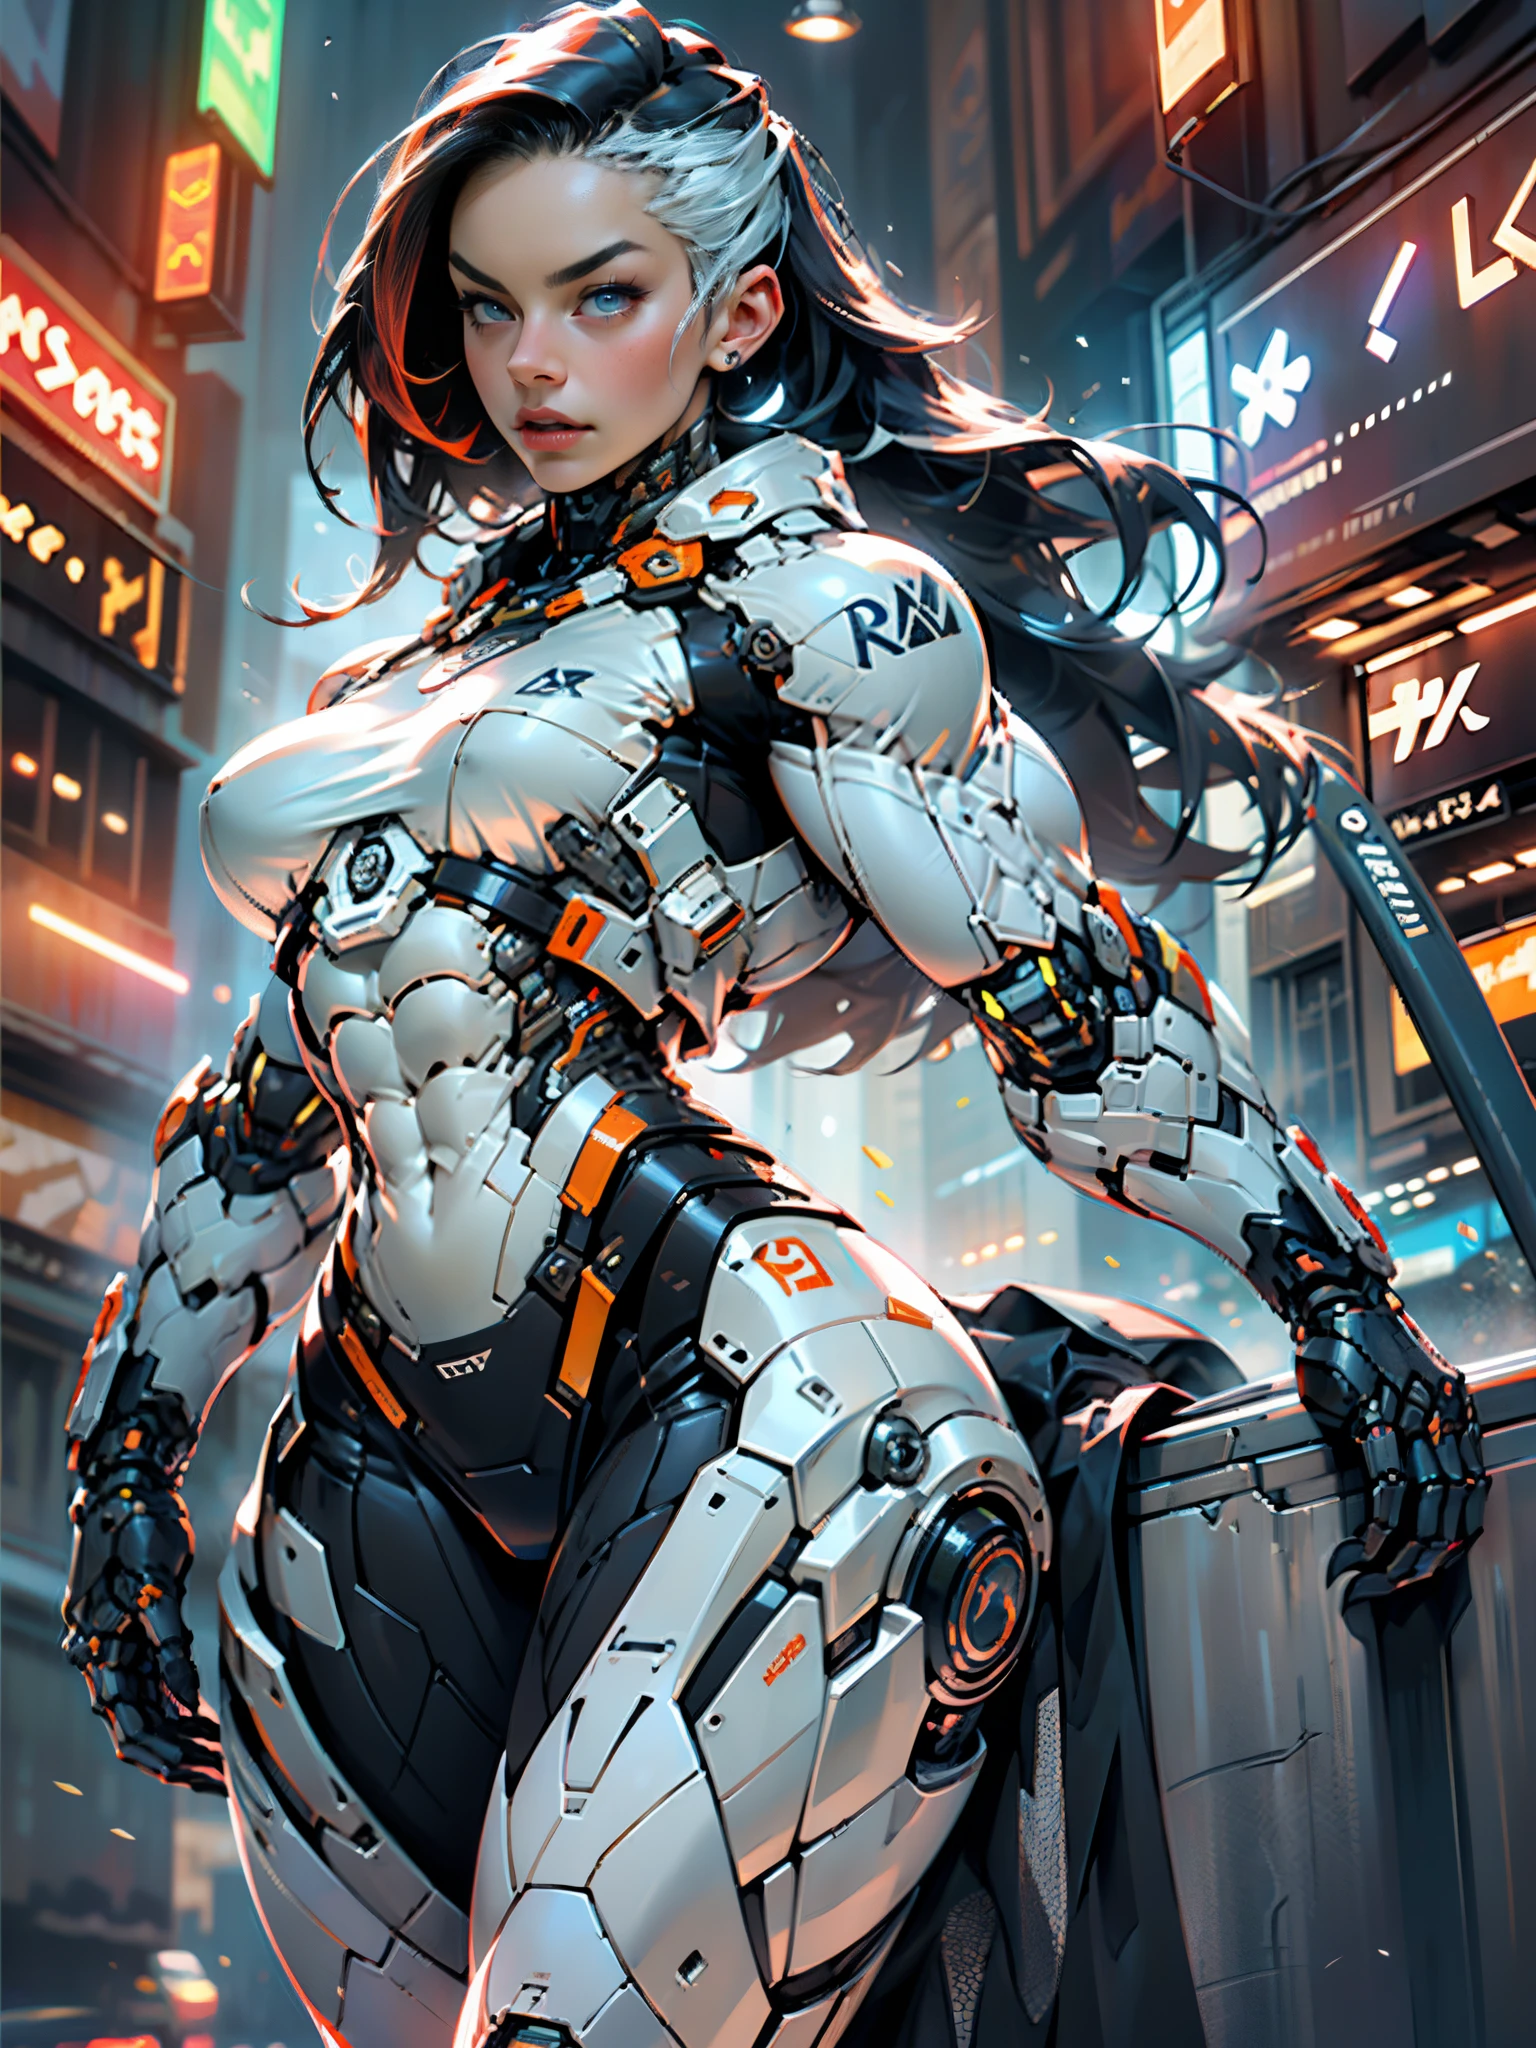 Cinematic, hyper-detailed, and insanely detailed, this artwork captures the essence of megan fox with breathtaking beauty. The color grading is beautifully done, enhancing the overall cinematic feel. Unreal Engine brings her anatomic cybernetic muscle suit to life, appearing even more mesmerizing. With the use of depth of field (DOF), every detail is focused and accentuated, drawing attention to her eyes and the intricate design of the anatomic cybernetic muscle suit . The image resolution is at its peak, utilizing super-resolution technology to ensure every pixel is perfect. Cinematic lighting enhances her aura, while anti-aliasing techniques like FXAA and TXAA keep the edges smooth and clean. Adding realism to the anatomic cybernetic muscle suit, RTX technology enables ray tracing. Additionally, SSAO (Screen Space Ambient Occlusion) gives depth and realism to the scene, the girl's anatomic cybernetic muscle suit become even more convincing. In the post-processing and post-production stages, tone mapping enhances the colors, creating a captivating visual experience. The integration of CGI (Computer-Generated Imagery) and VFX (Visual Effect brings out the anatomic cybernetic muscle suit's intricate features in a seamless manner. SFX (Sound Effects) complement the visual artistry, immersing the viewer further into this fantastic world. The level of detail is awe-inspiring, with intricate elements meticulously crafted, the artwork hyper maximalist and hyper-realistic. Volumetric effects add depth and dimension, and the photorealism is unparalleled. The image is rendered in 8K resolution, ensuring super-detailed visuals. The volumetric lightning adds a touch of magic, highlighting her beauty and the aura of her anatomic cybernetic muscle suit in an otherworldly way. High Dynamic Range (HDR) technology makes the colors pop, adding richness to the overall composition. Ultimately, this artwork presents an unreal portrayal of a super muscled cybernetic female android